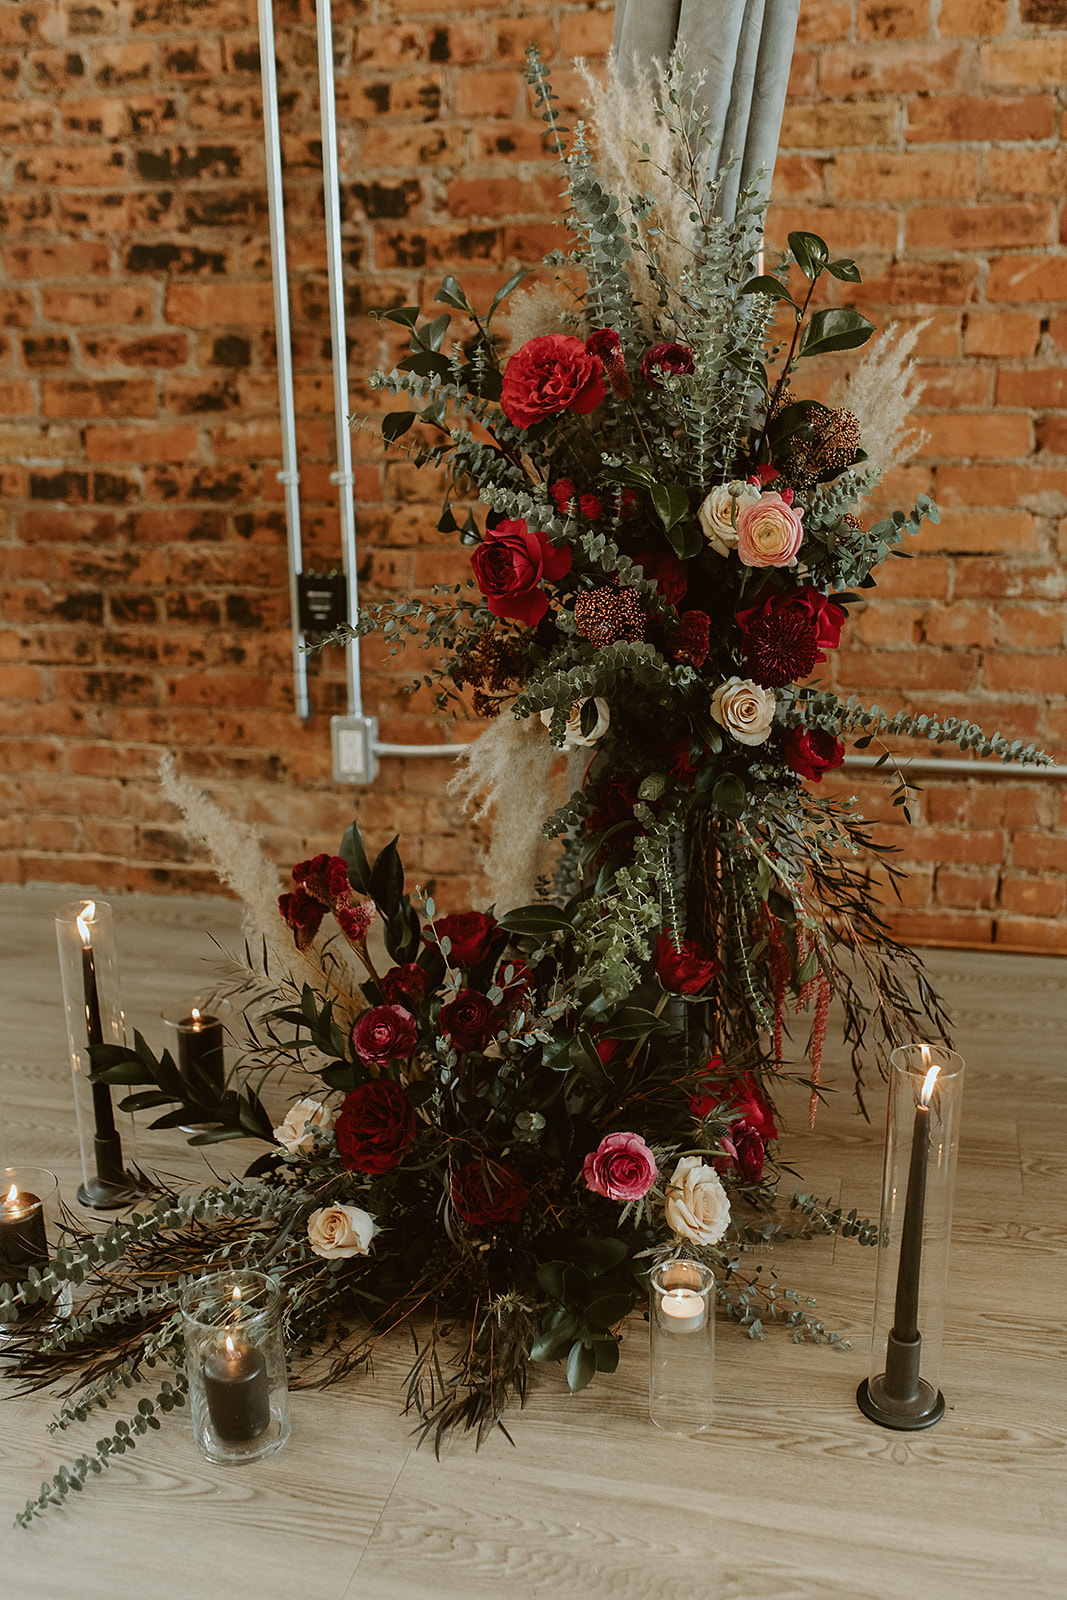 Boho rich jewell tone wedding decor at Venue 308 with black candle sticks and green drapery